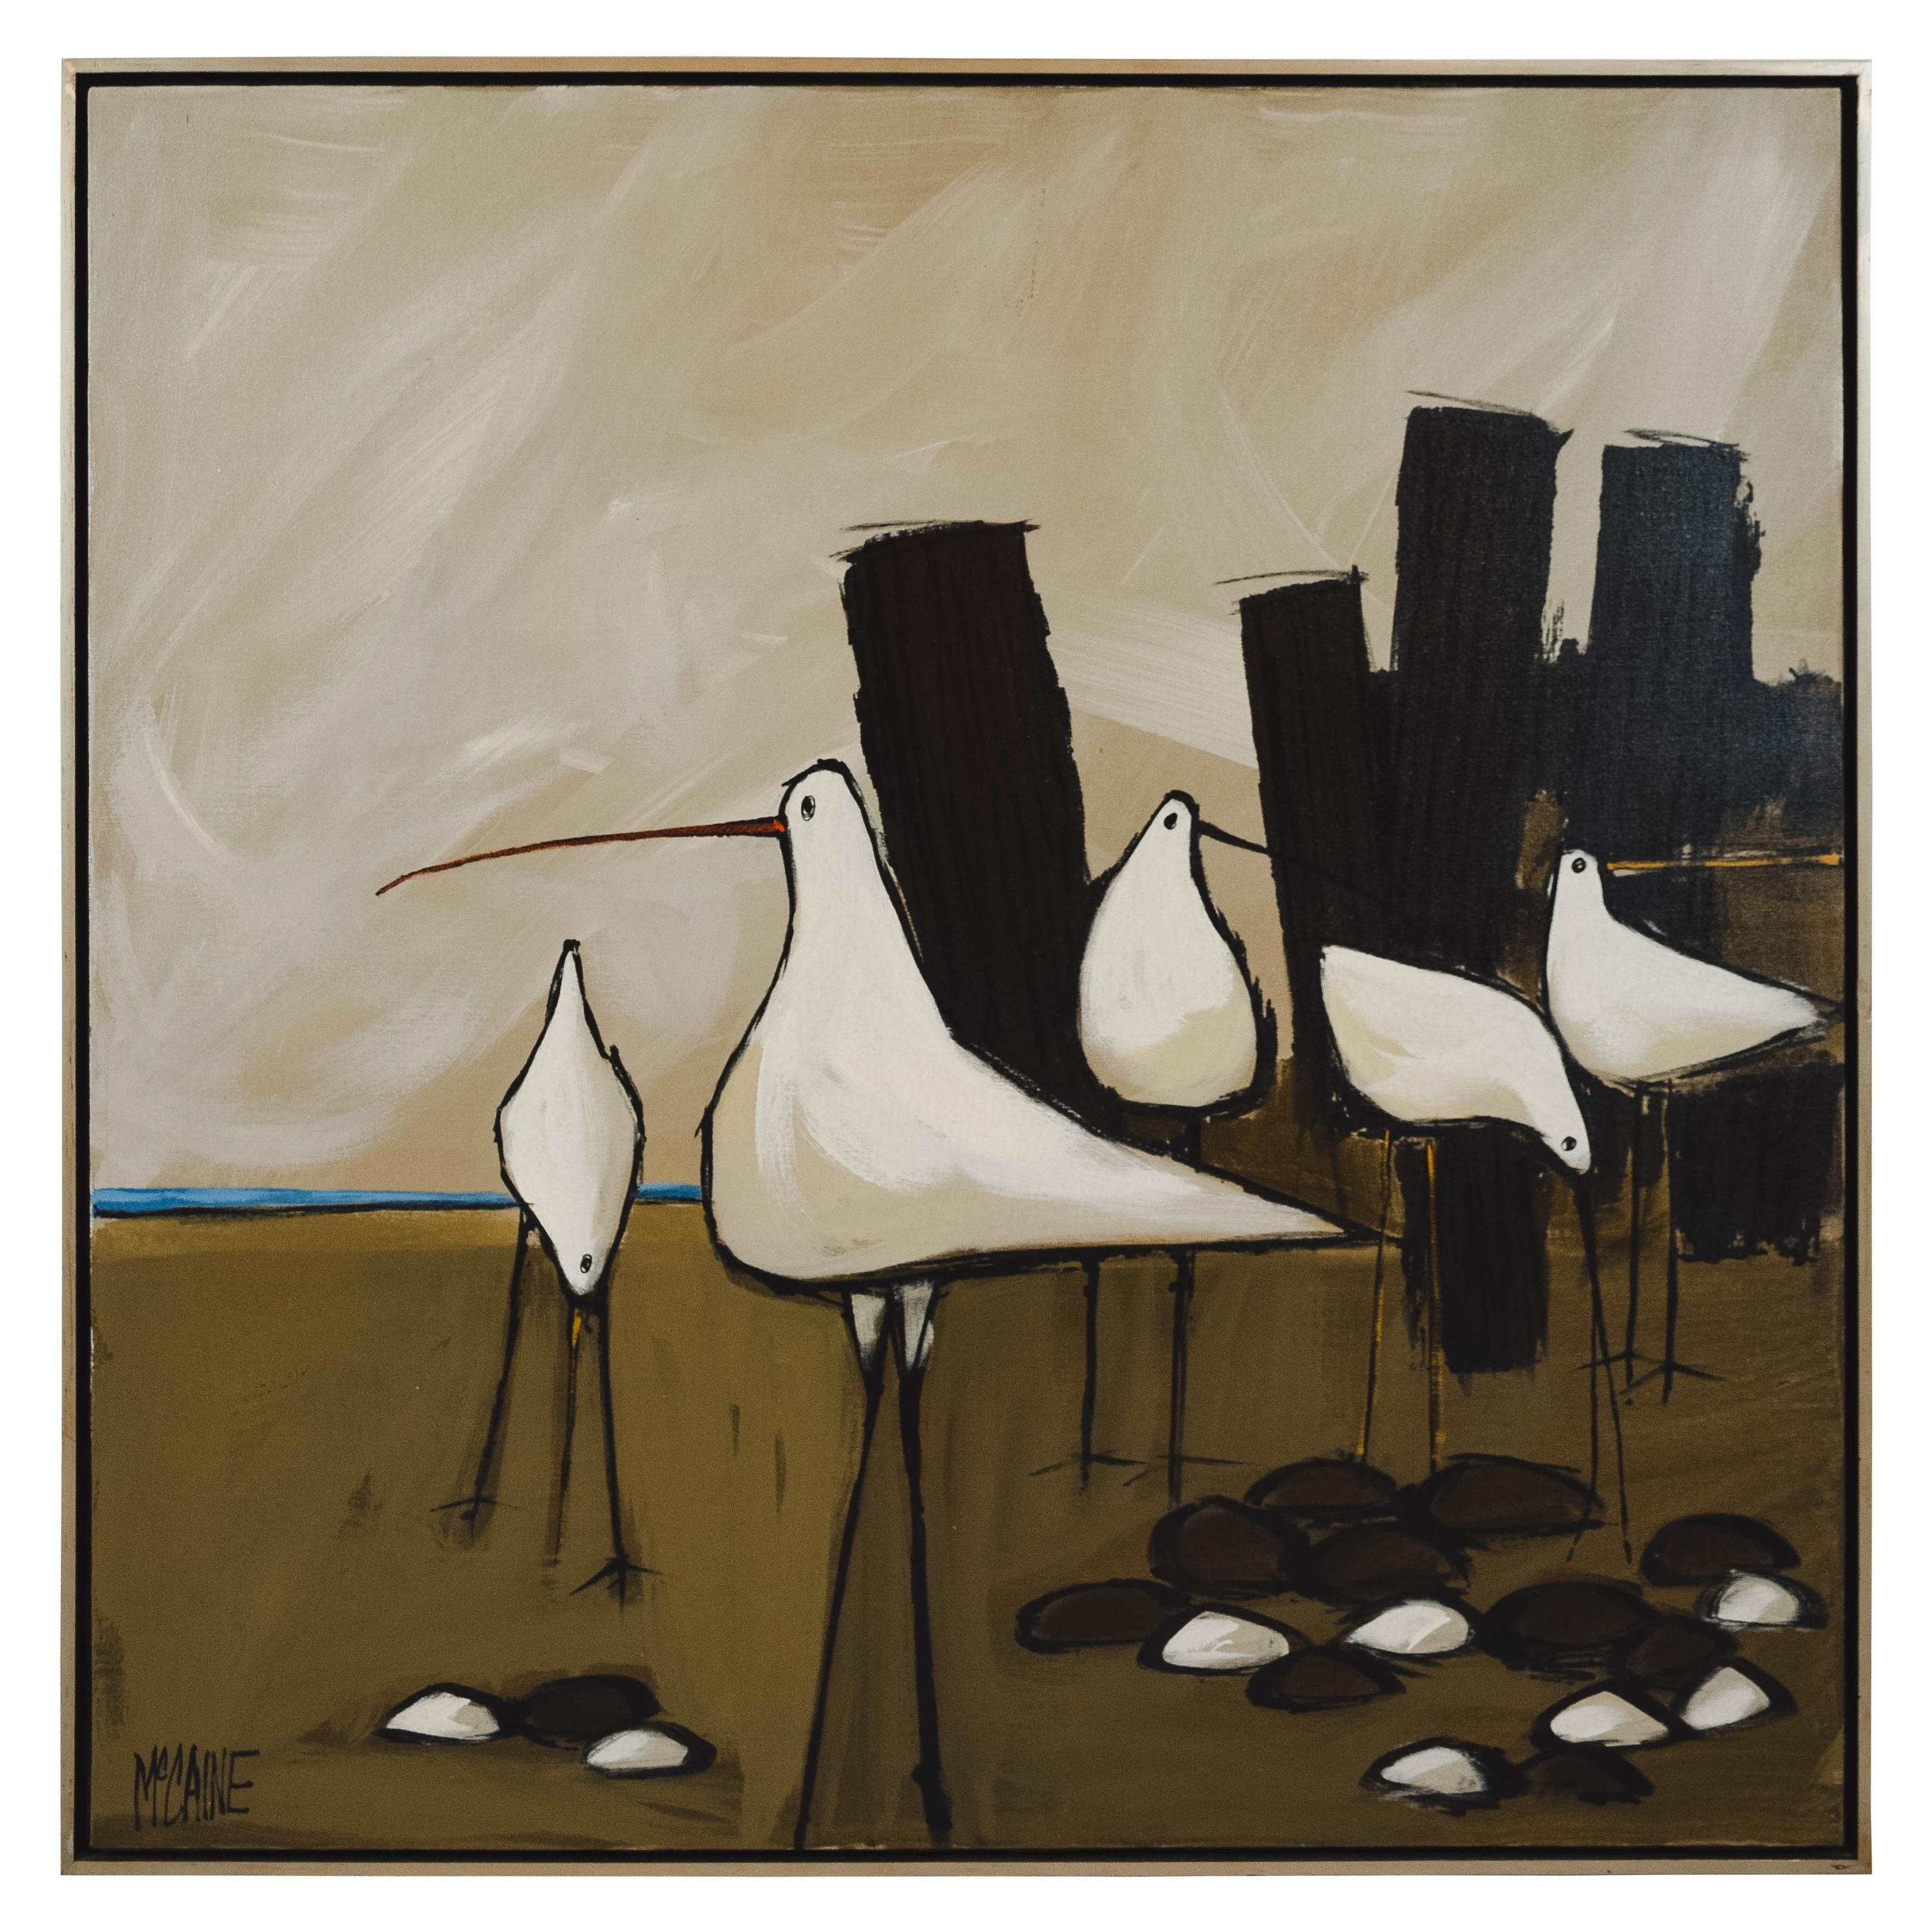 Large Mid-Century Modern Seagulls Oil Painting by McCaine